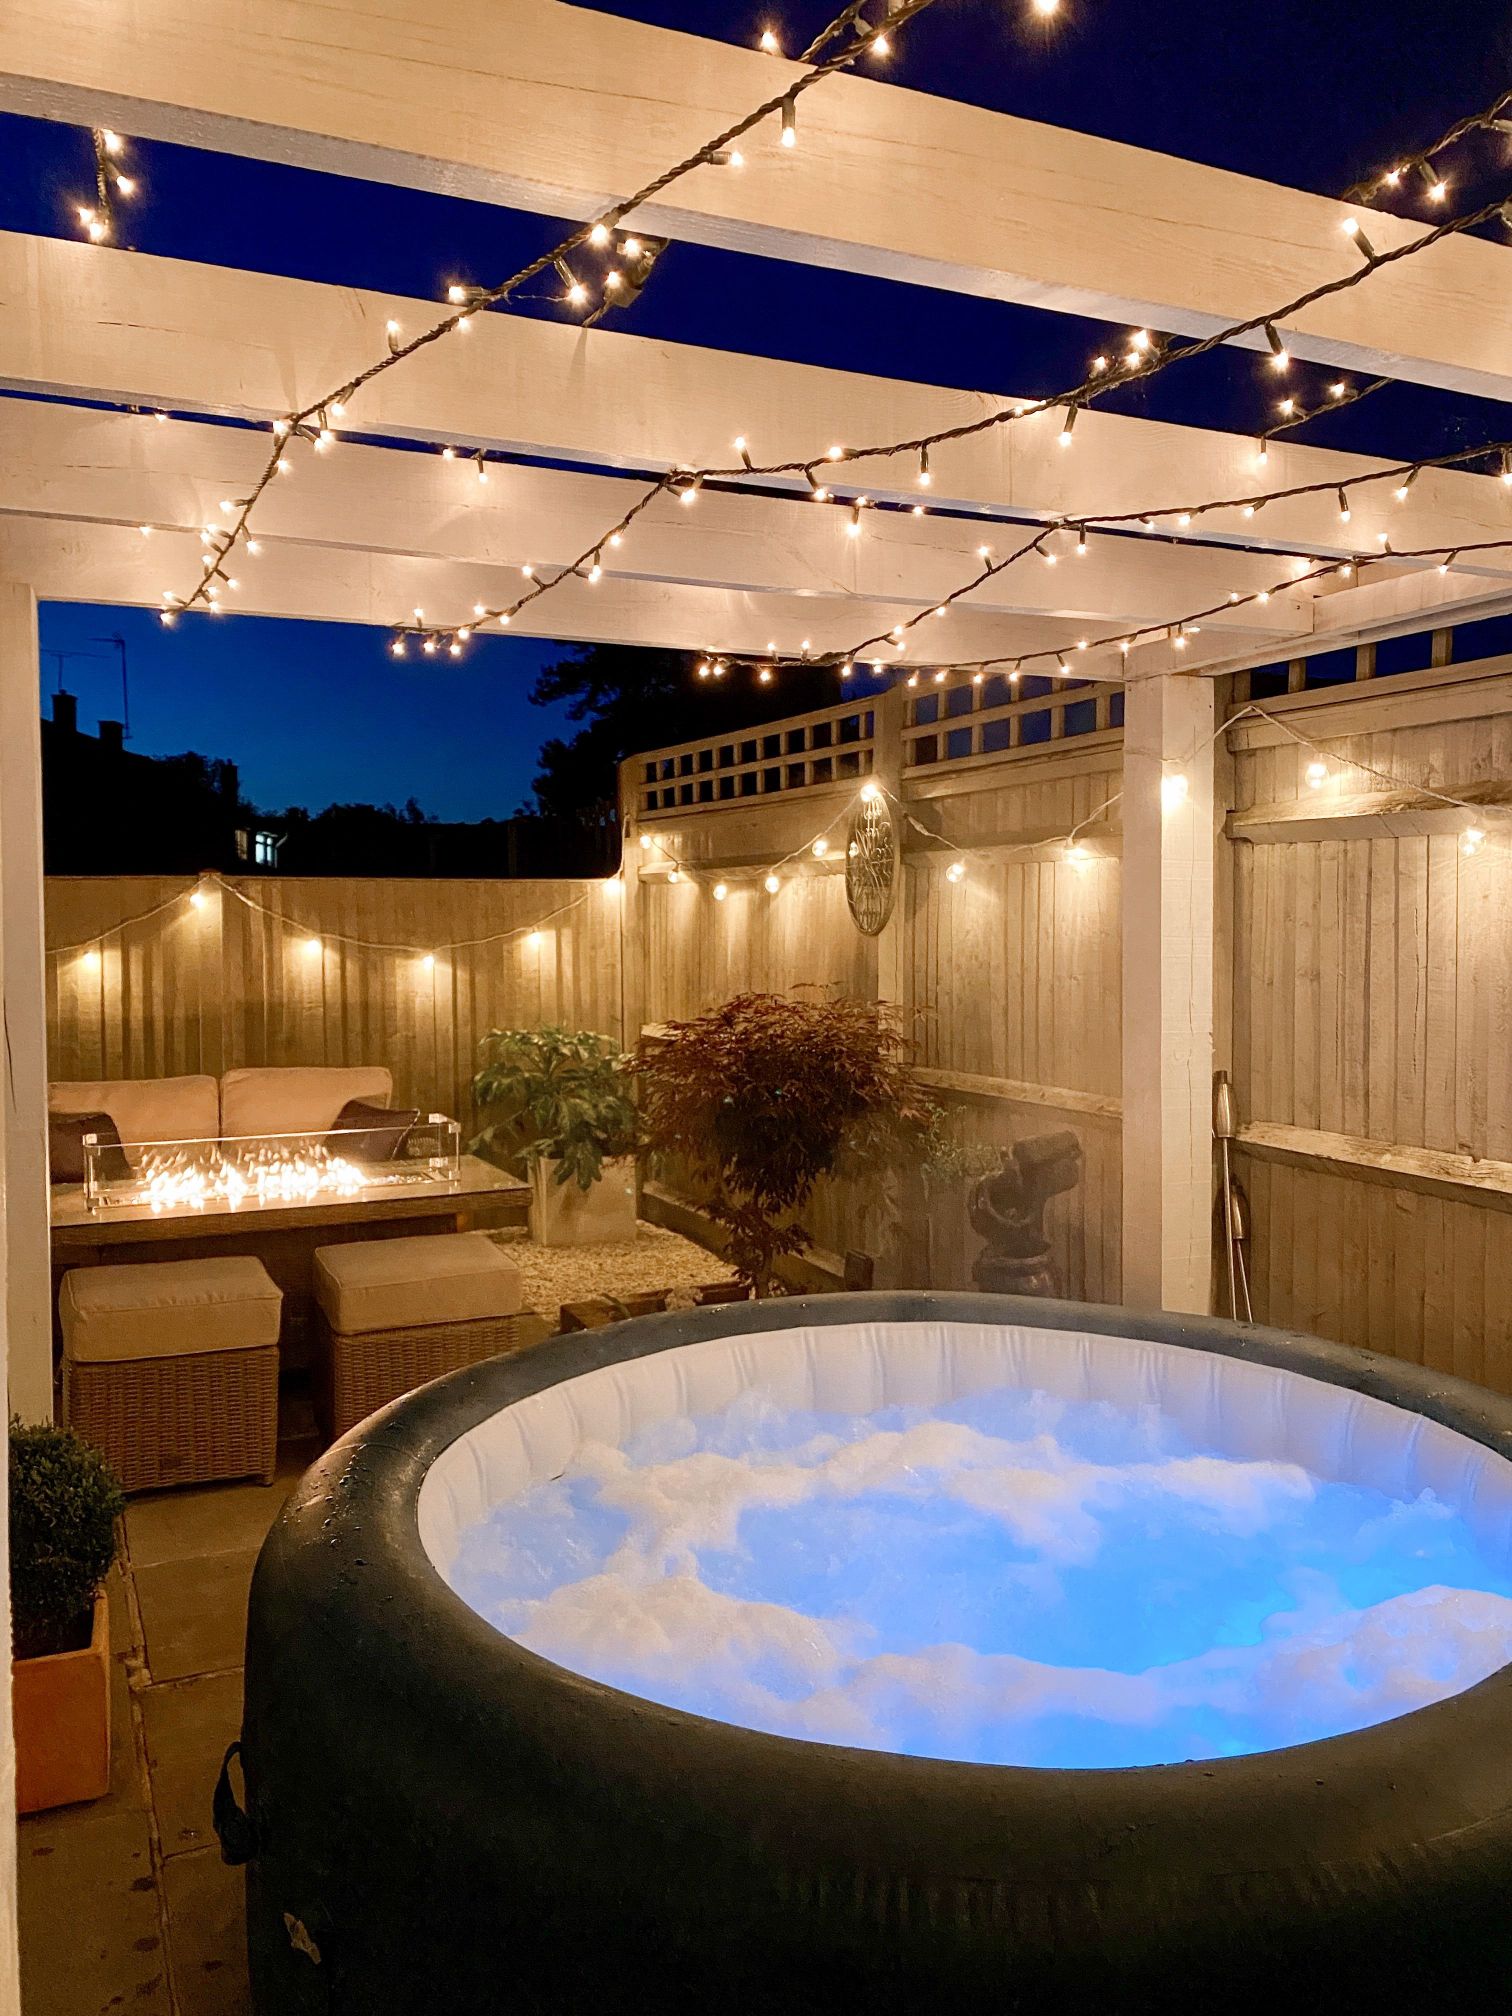 Inflatable hot tub with decorative lighting